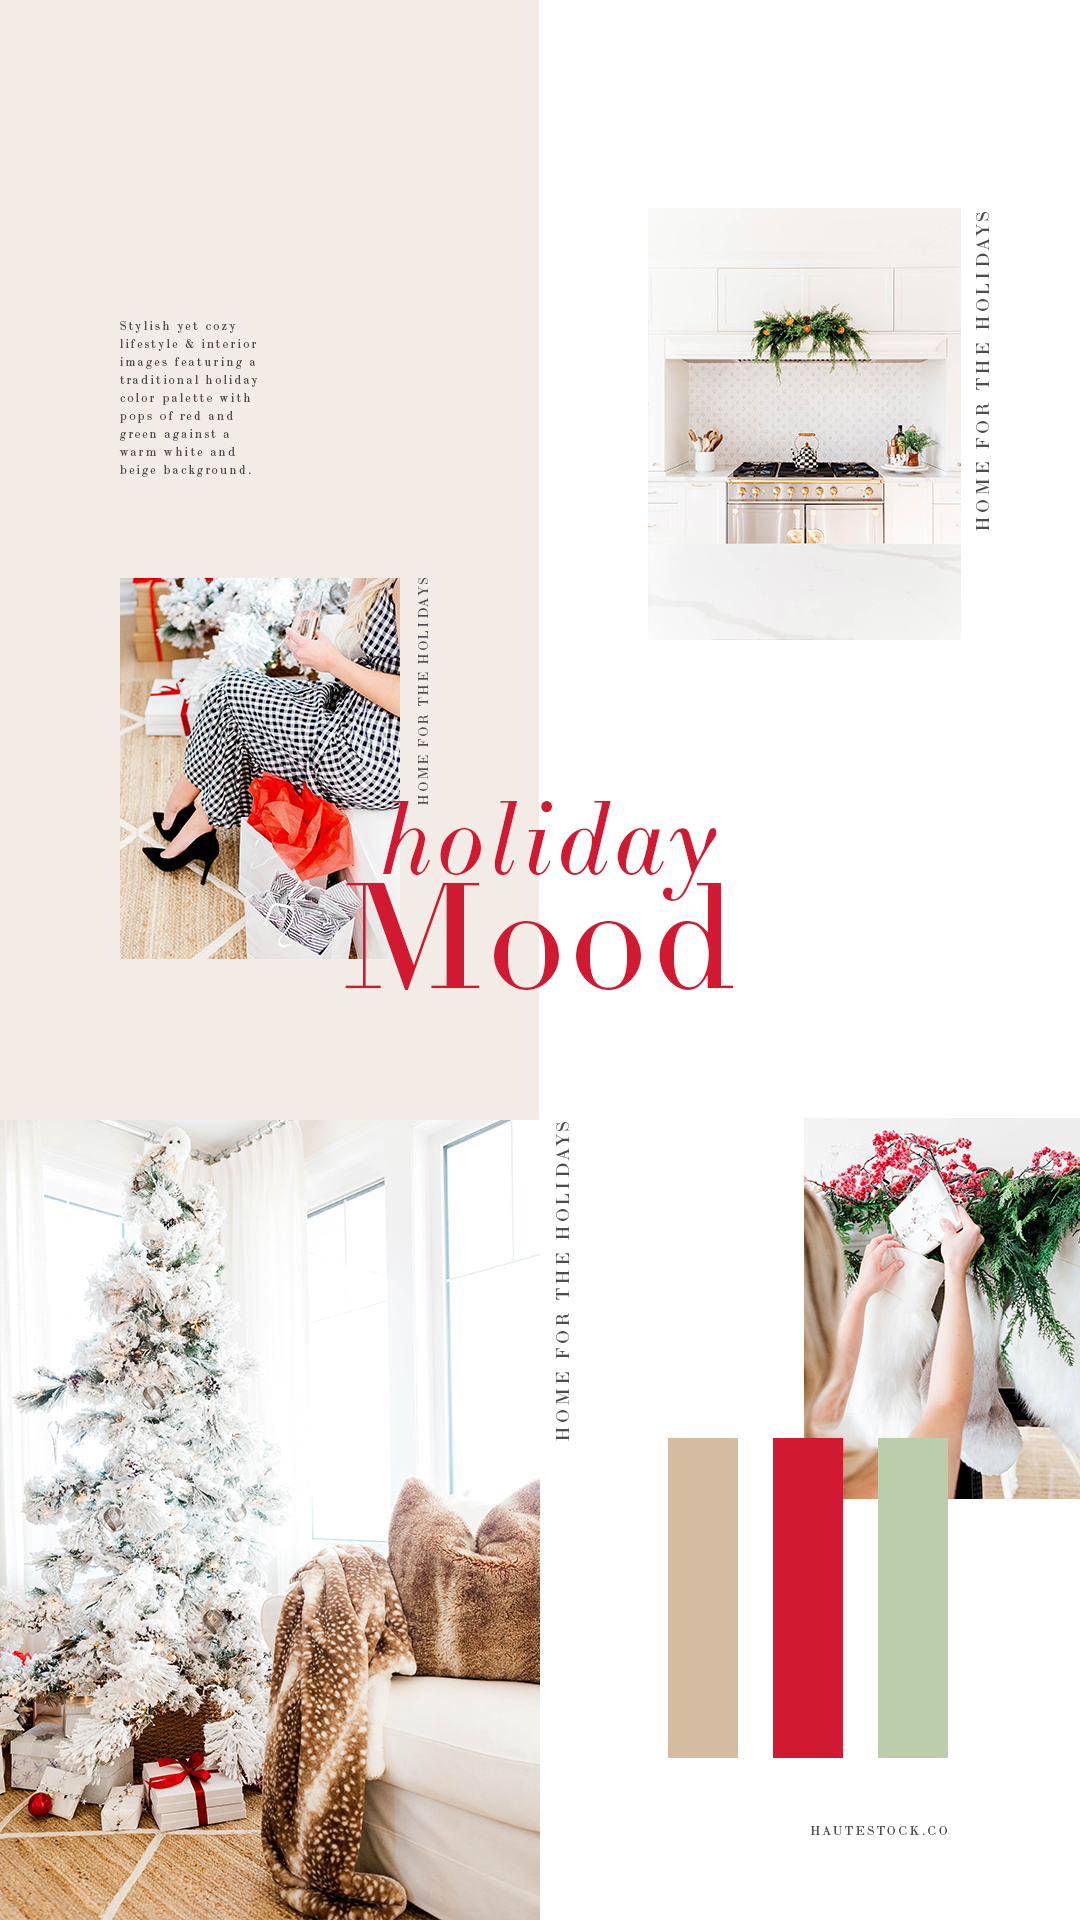 Stylish yet cozy lifestyle & interior images featuring a traditional holiday color palette with pops of red and white against a warm white and beige background.